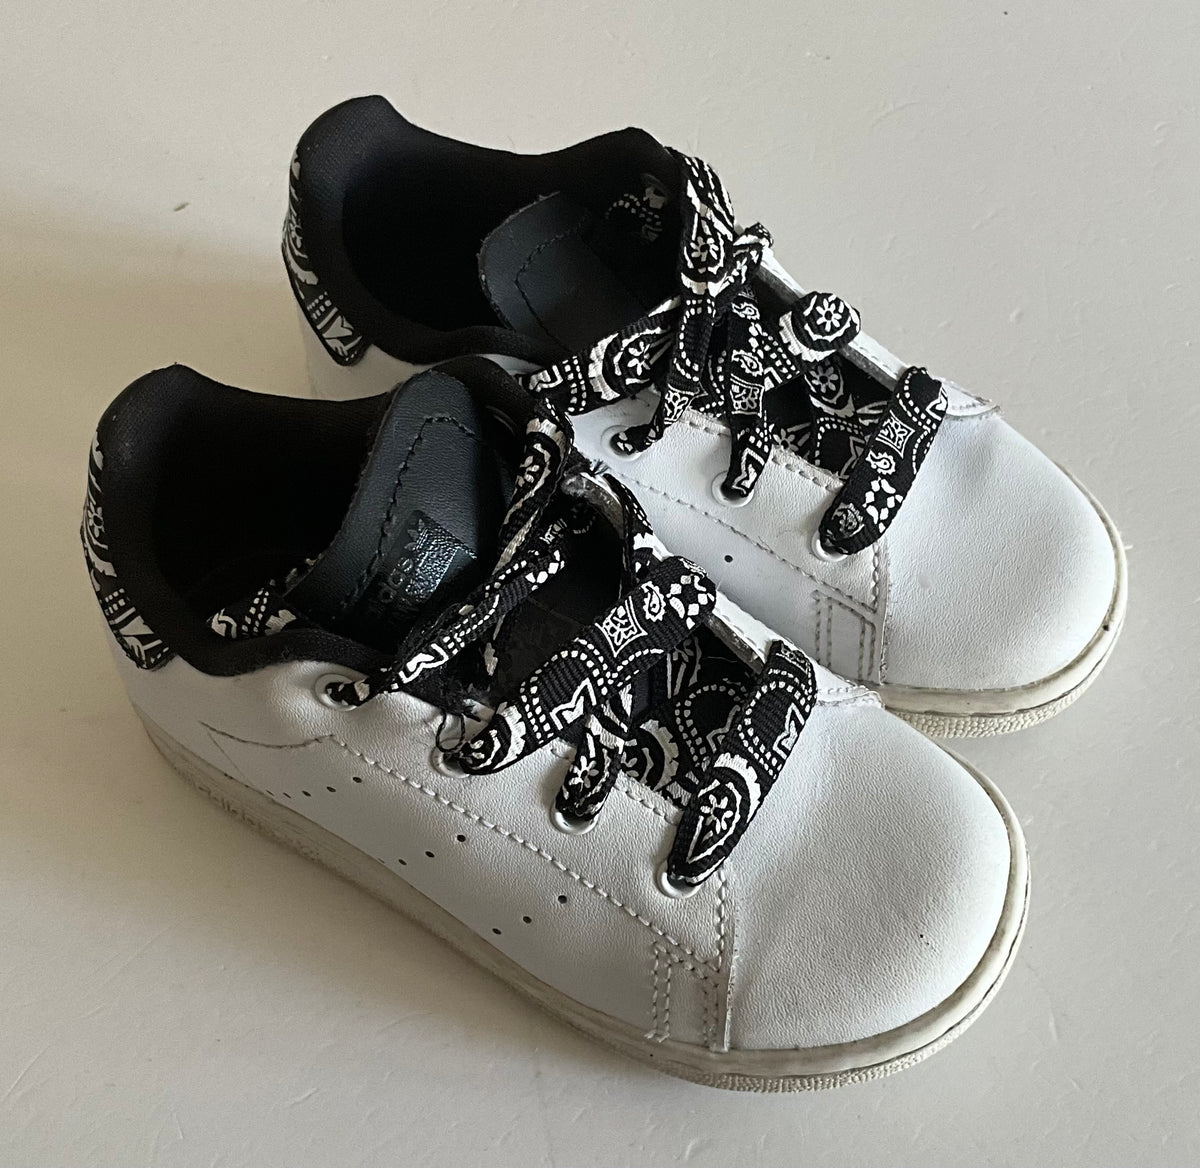 Stan Smith Adidas Shoes, Infant Size 7